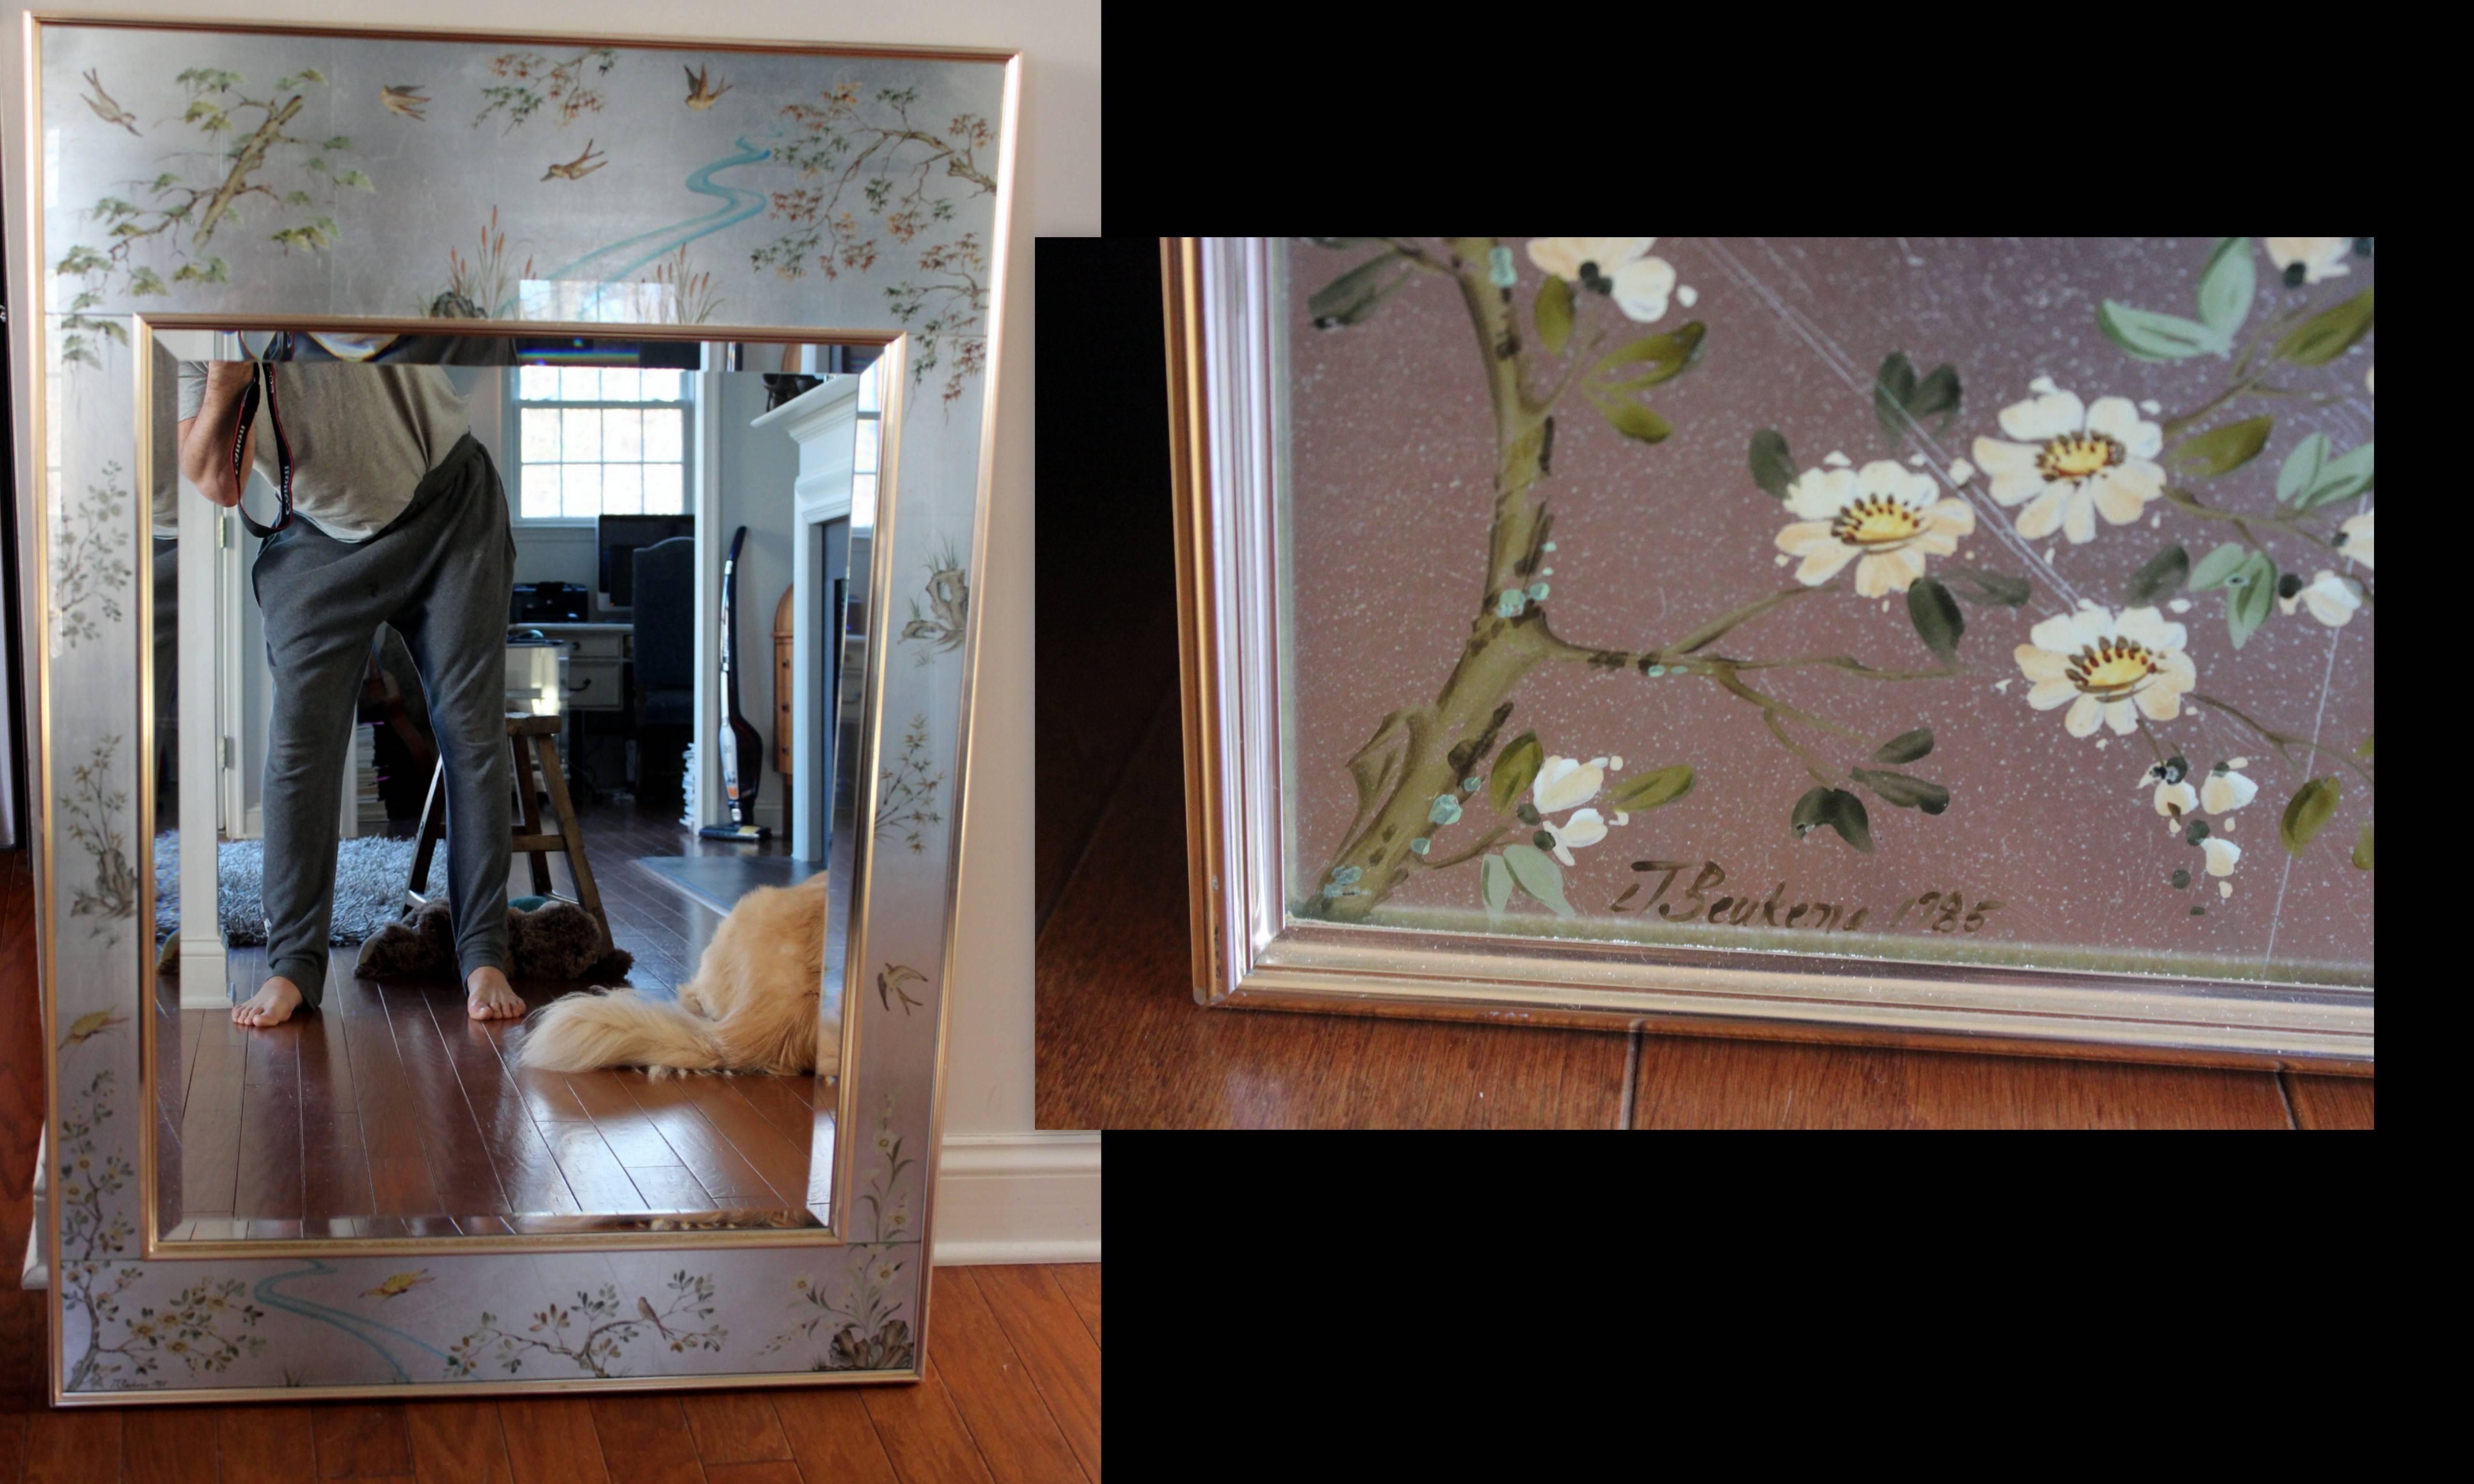 Two La Barge chinoiserie reverse hand-painted glass, gilt and églomisé mirrors, both signed one in 1978 and one in 1983. Beveled mirrors one chrome and one gold anodized aluminum gallery style surround. The mirrors are then framed by a painted